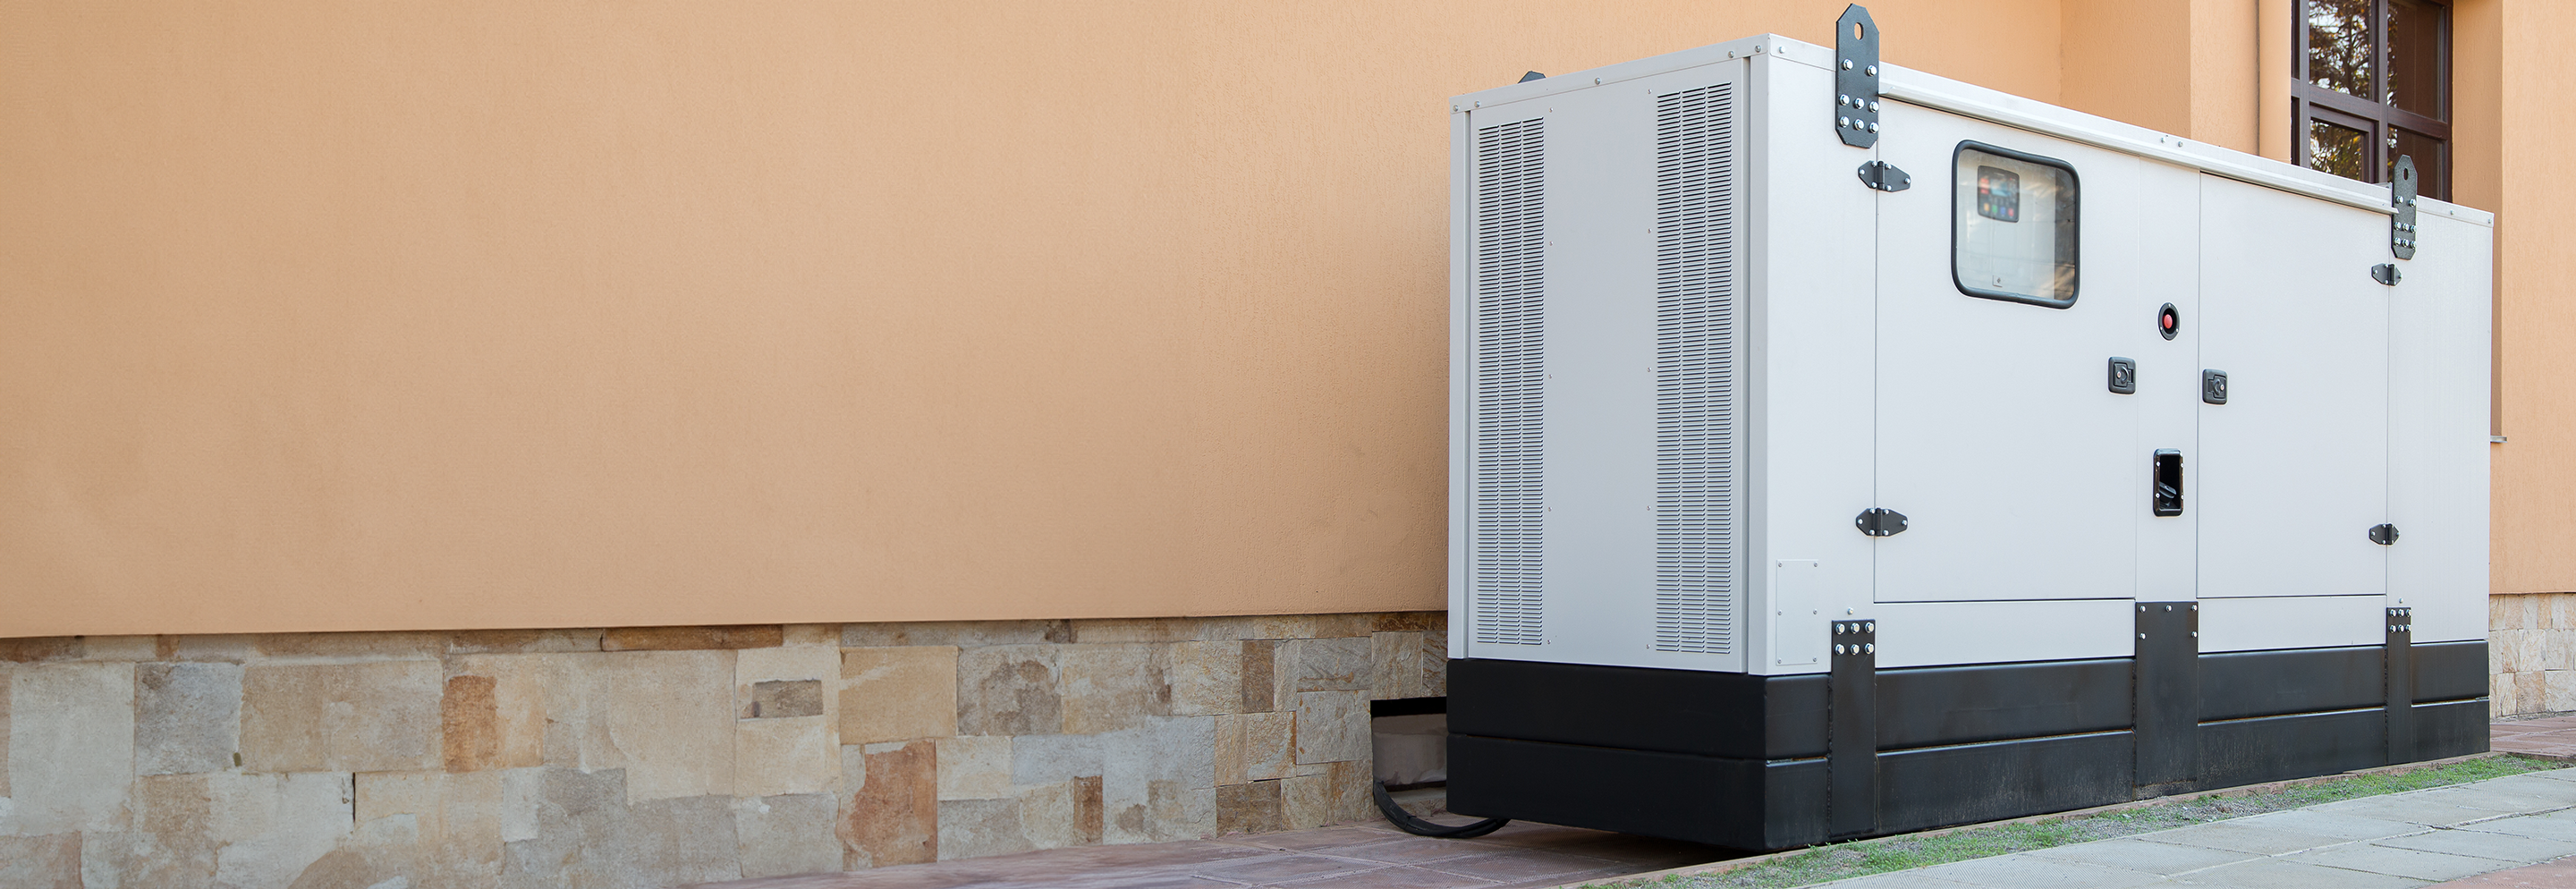 Is My Backup Generator Protected? How to Safeguard Residential and Commercial Investments